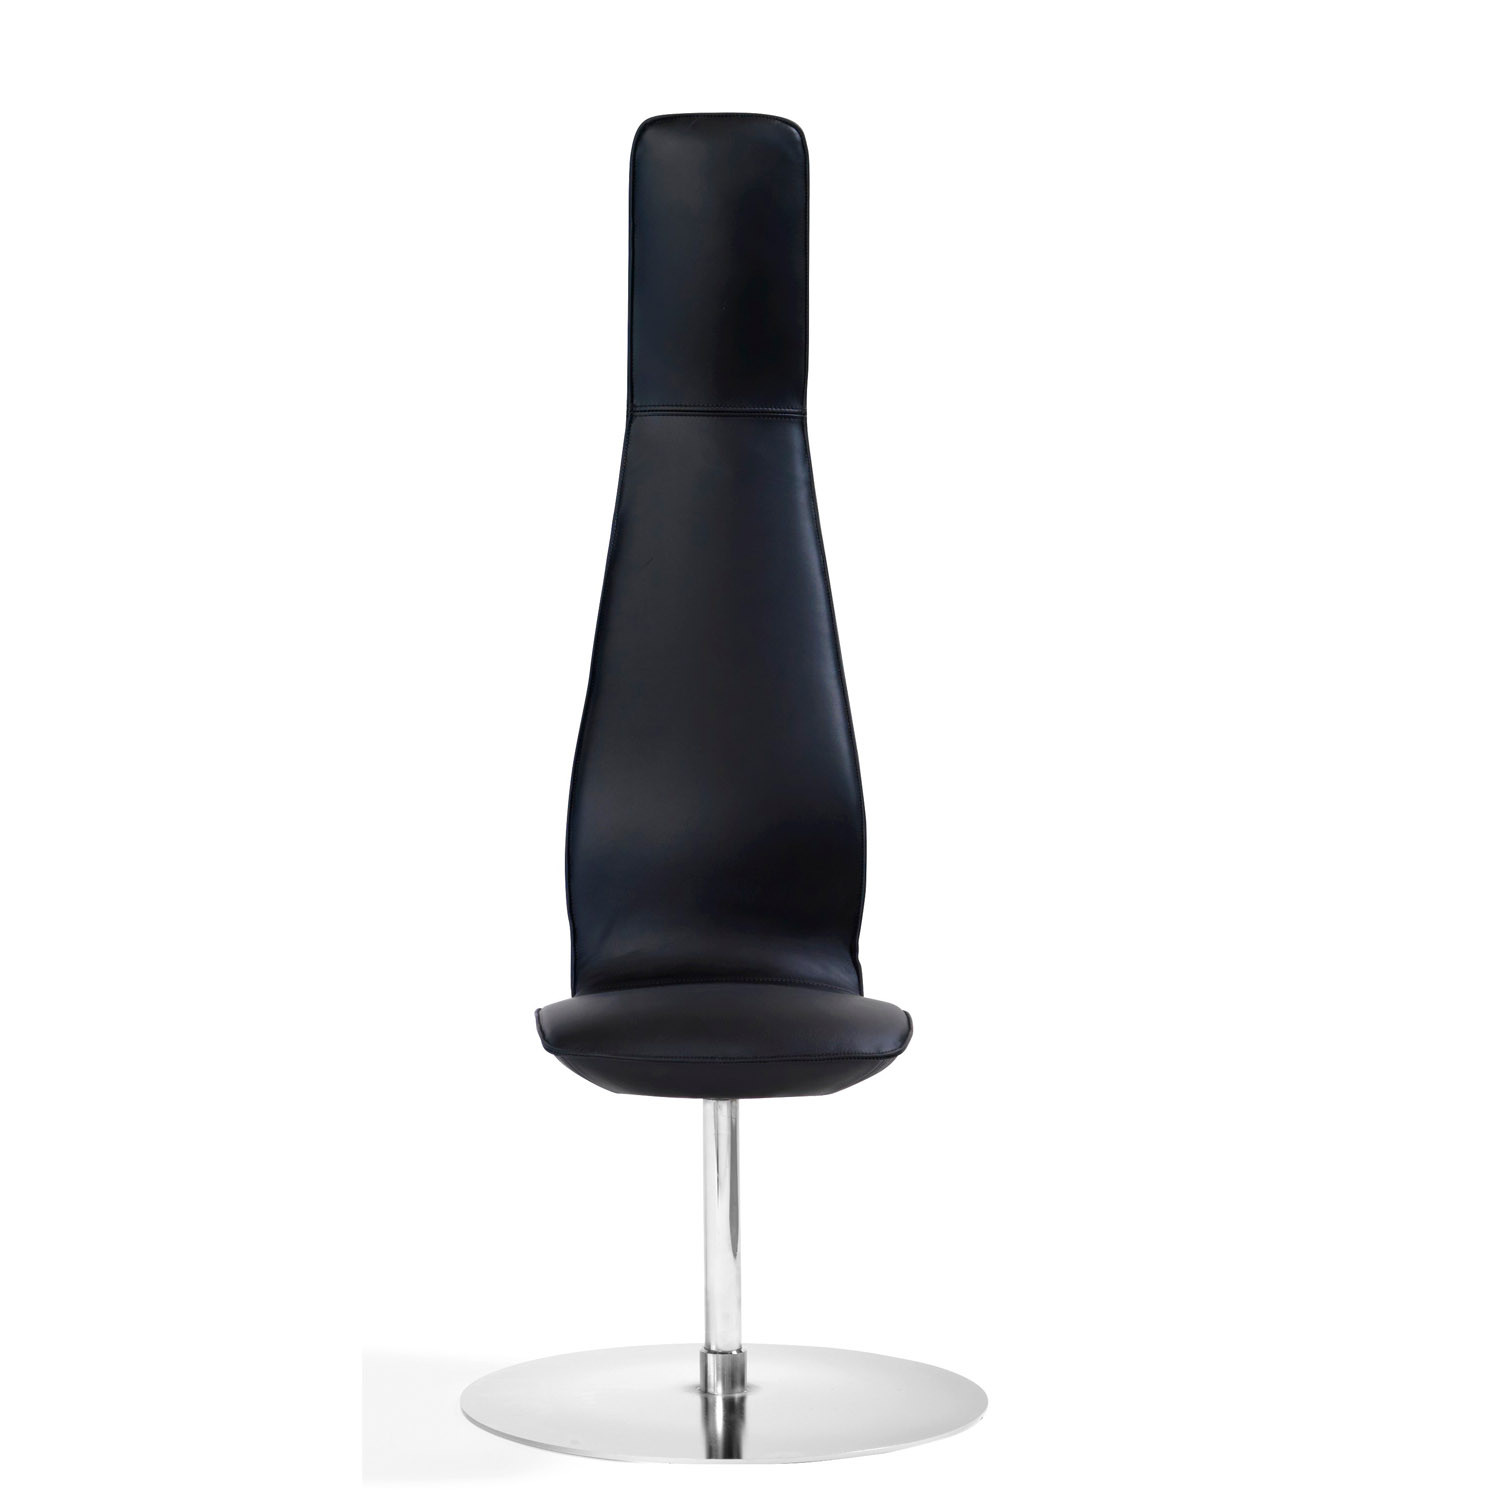 Poppe Chair by Borselius, Lindau and Bernstrand